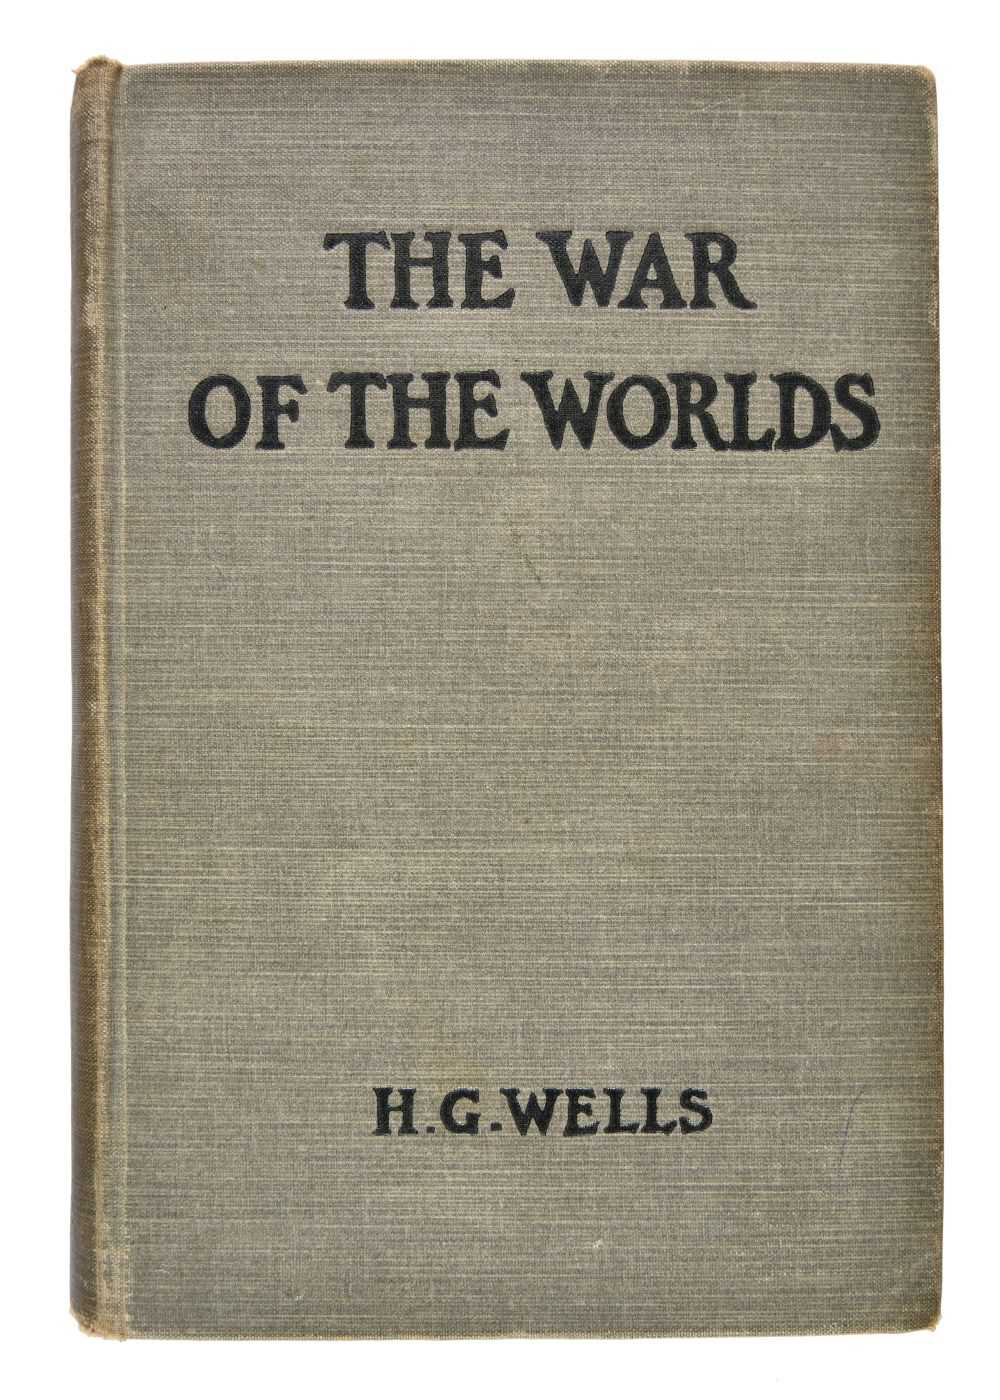 Lot 755 - Wells (H. G.) The War of the Worlds, 1st edition, 1898, signed with a portrait